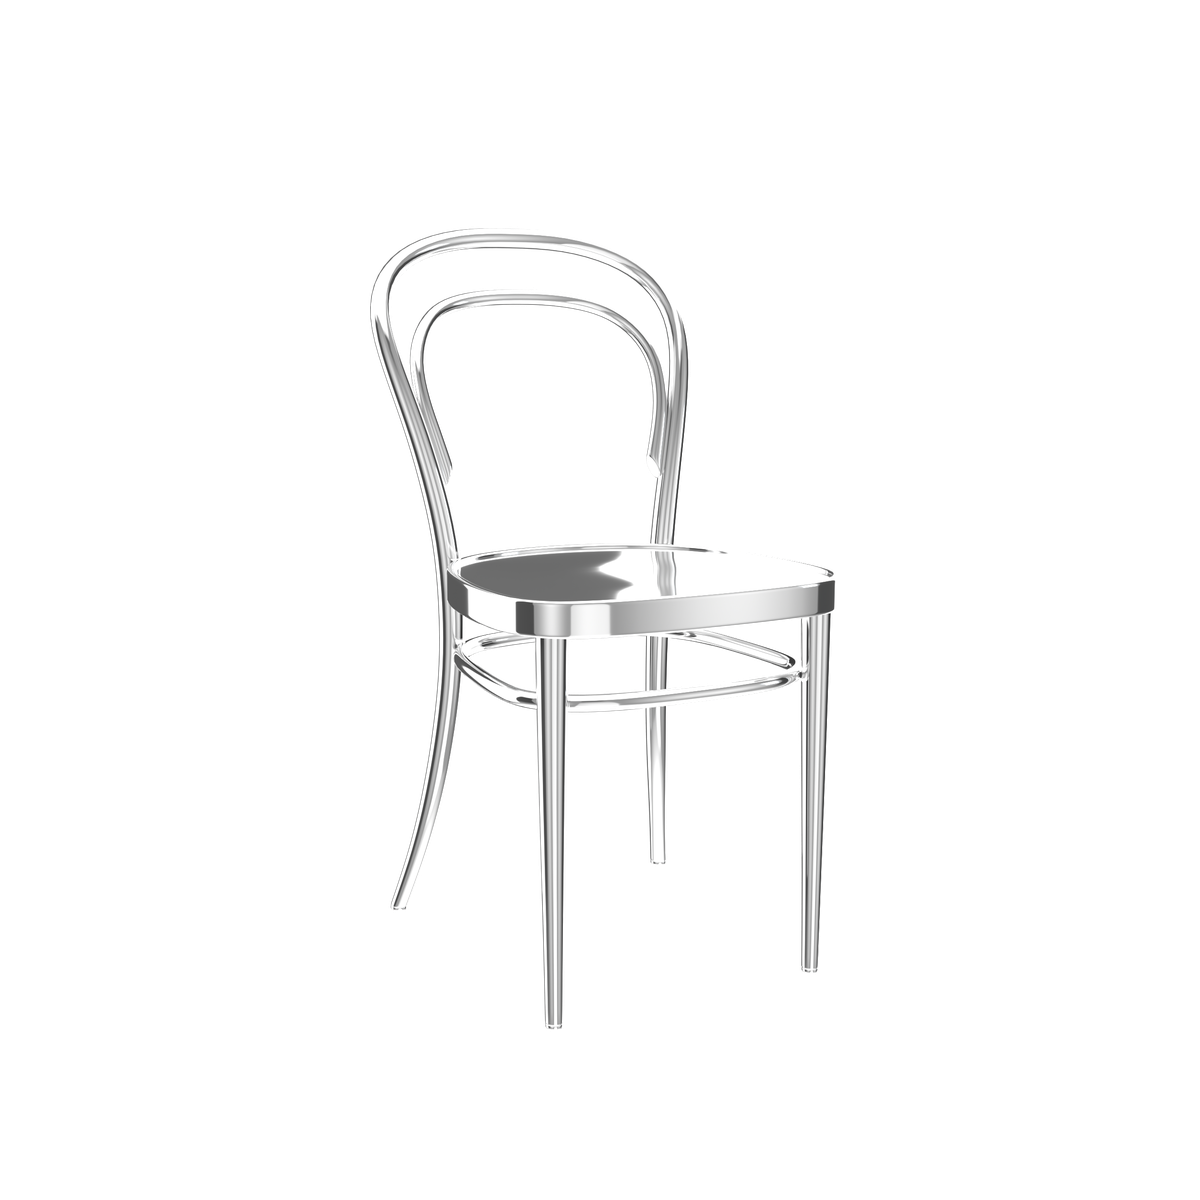  A flimsy-looking wooden chair with four legs a round seat and an arched back frame with no support.